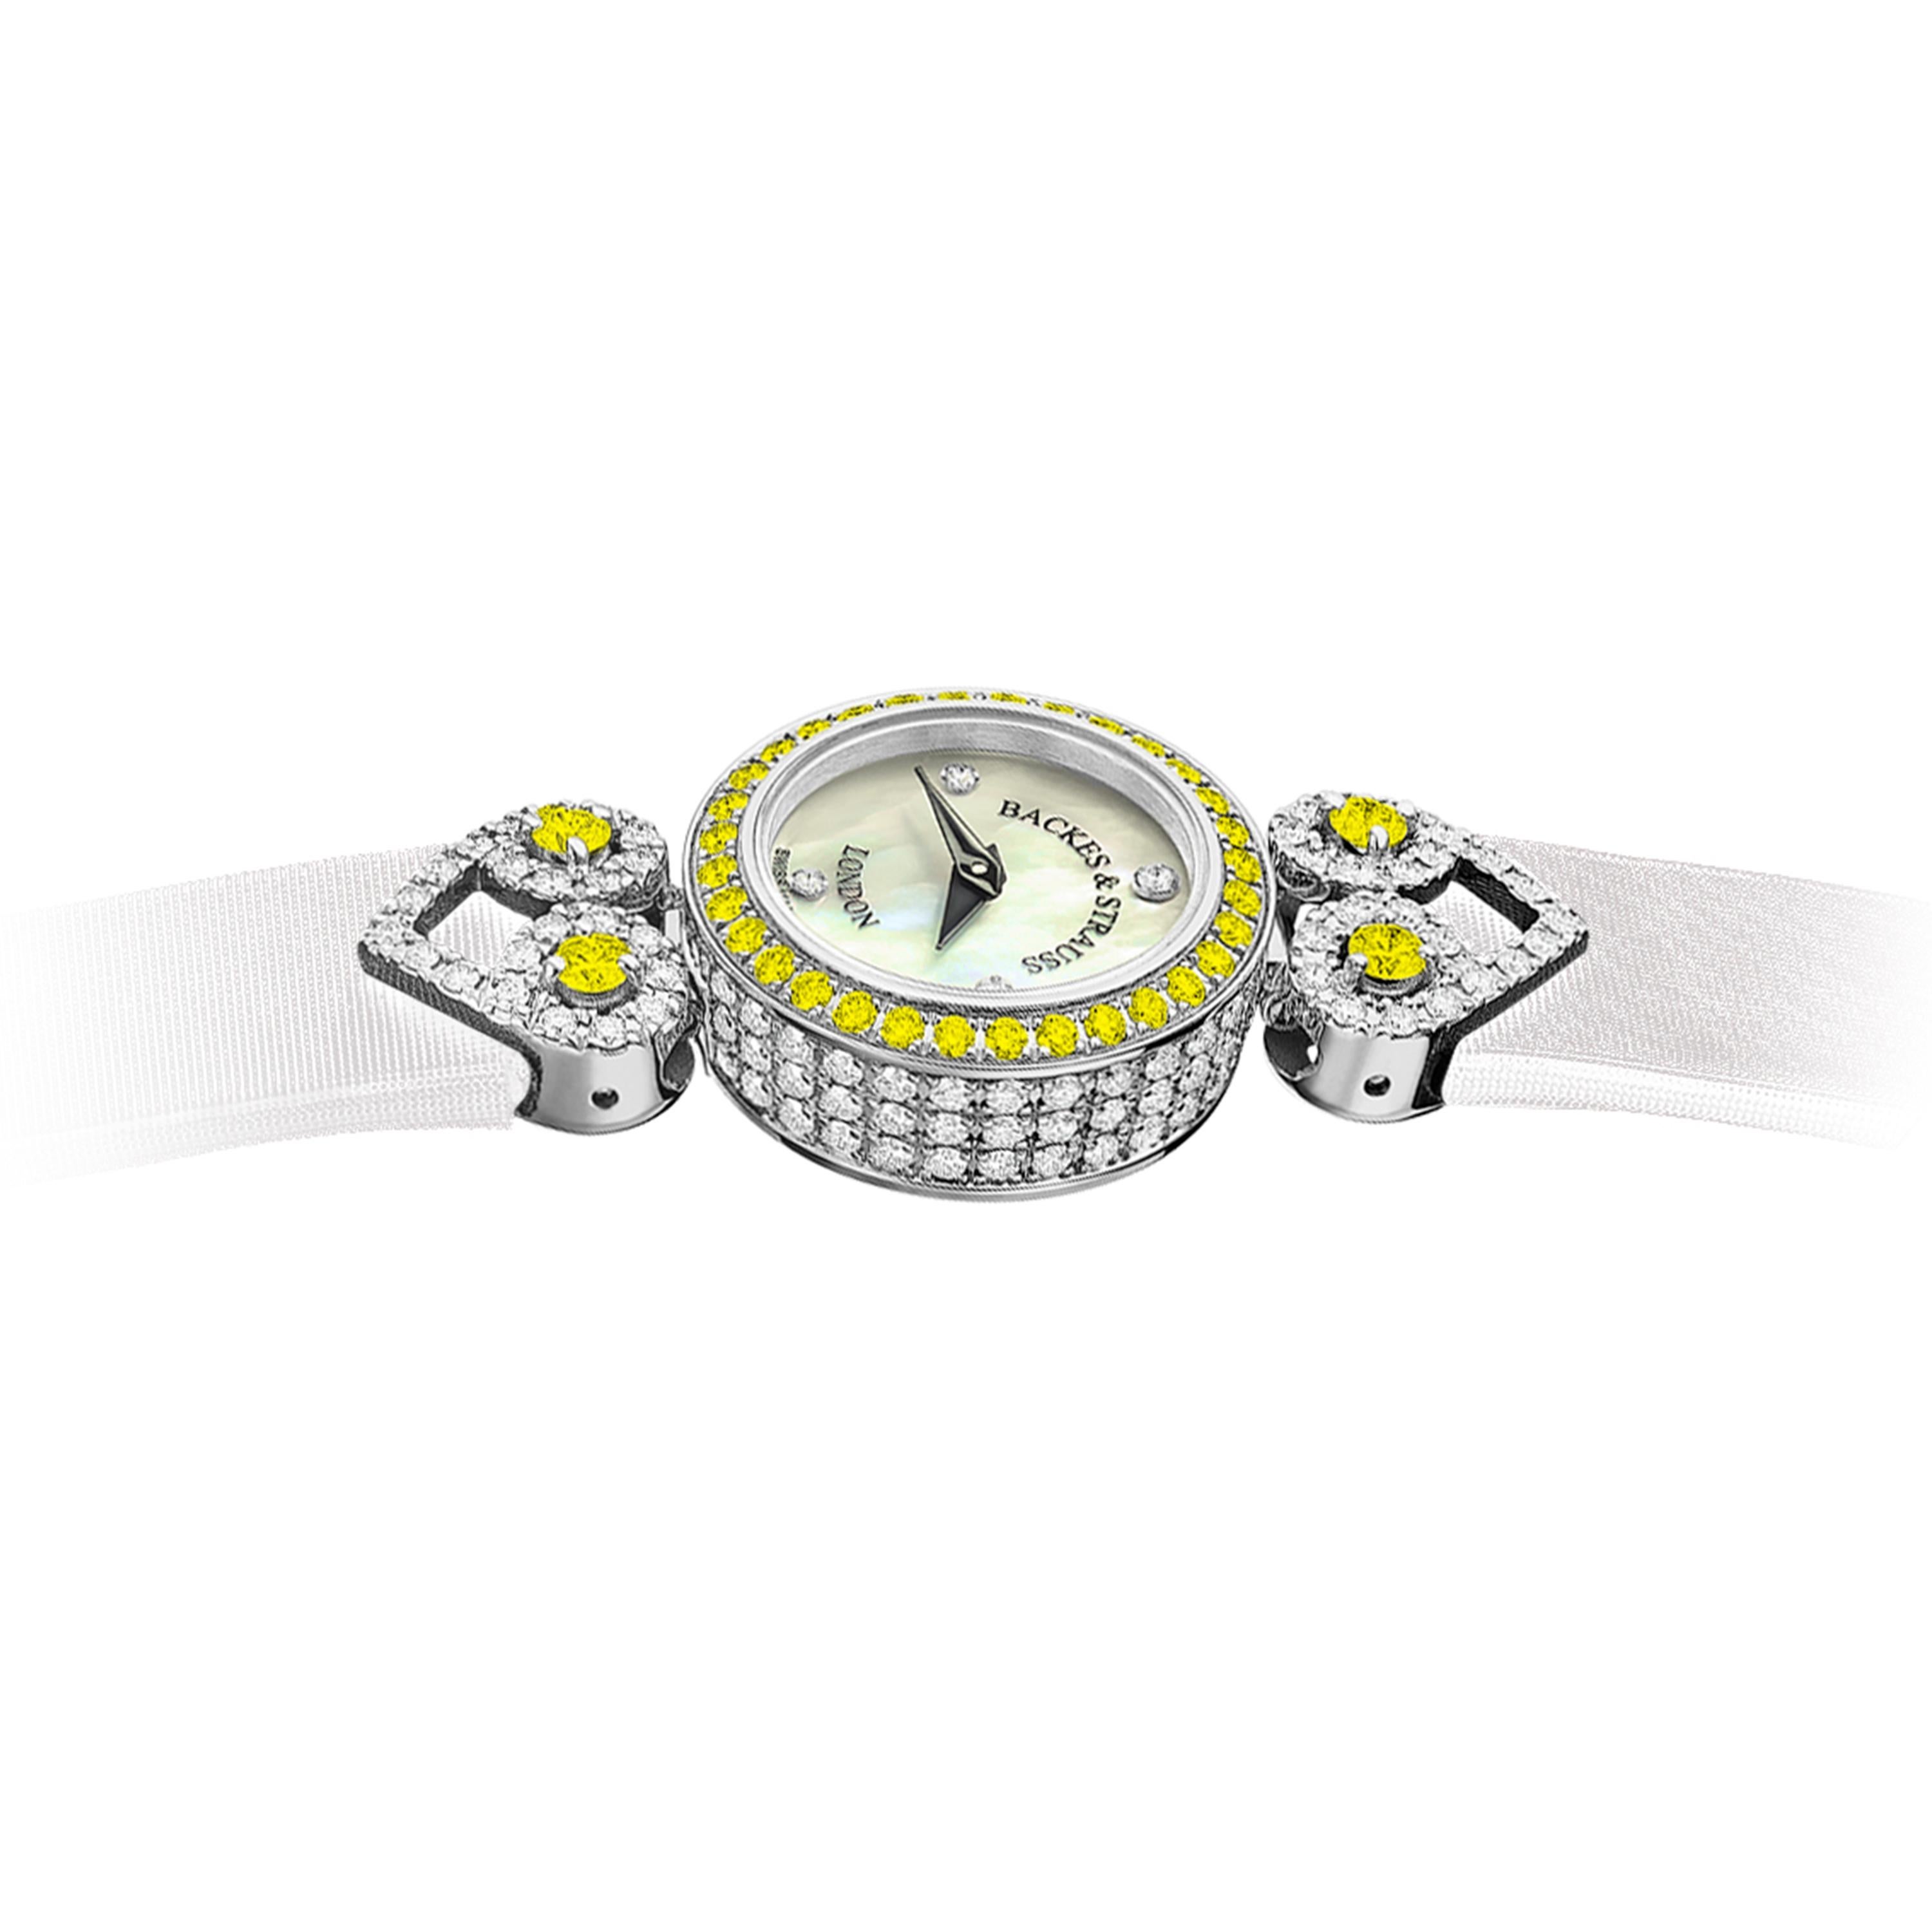 Miss Victoria Fancy Canary is a luxury diamond watch for women crafted in 18kt White gold, featuring the mother-of-pearl dial, quartz movement. The case, dial and buckle are set with white Ideal Cut and fancy yellow diamonds. It is an 18mm classy